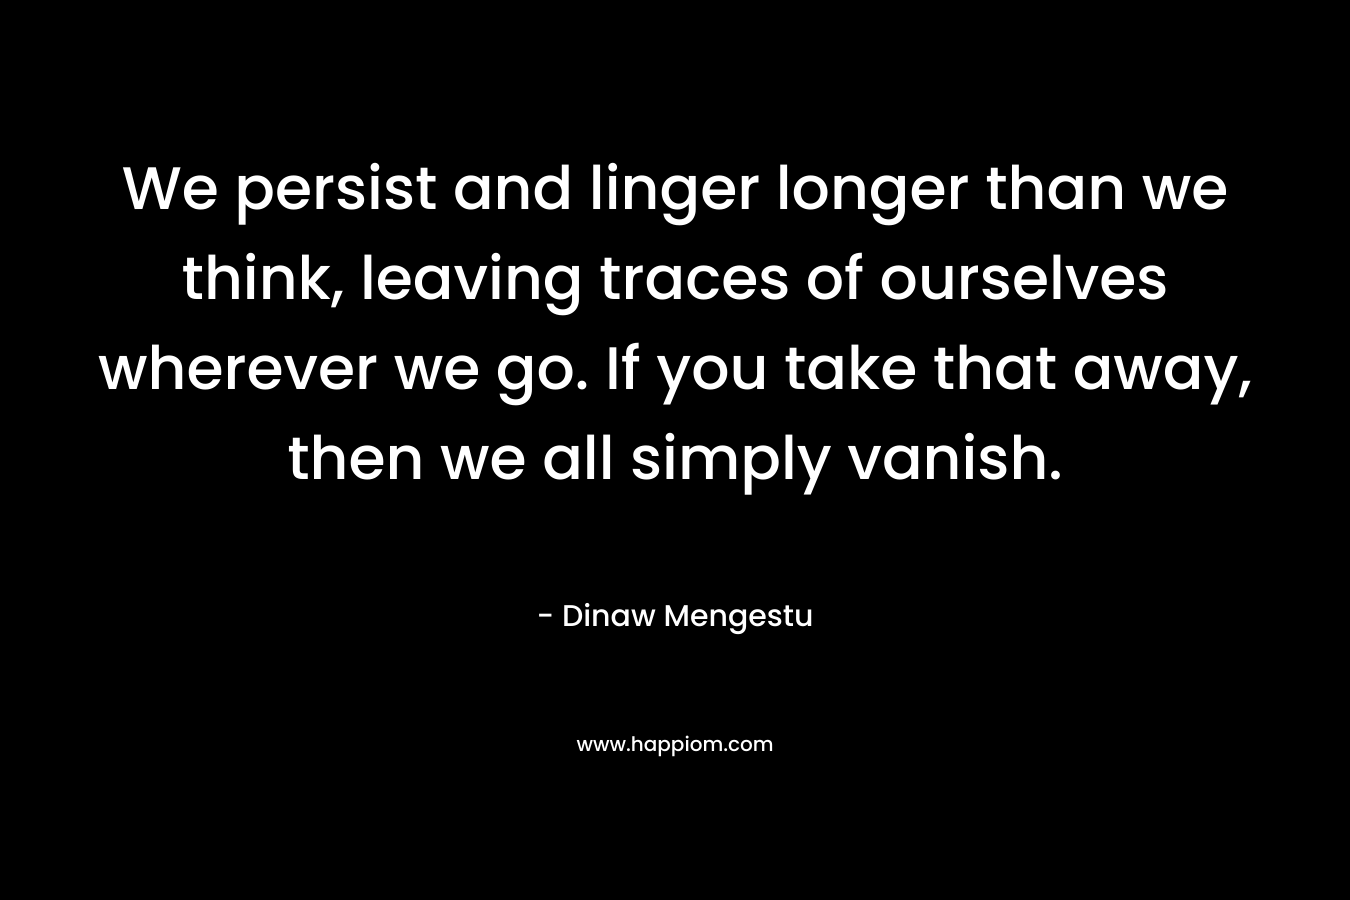 We persist and linger longer than we think, leaving traces of ourselves wherever we go. If you take that away, then we all simply vanish. – Dinaw Mengestu